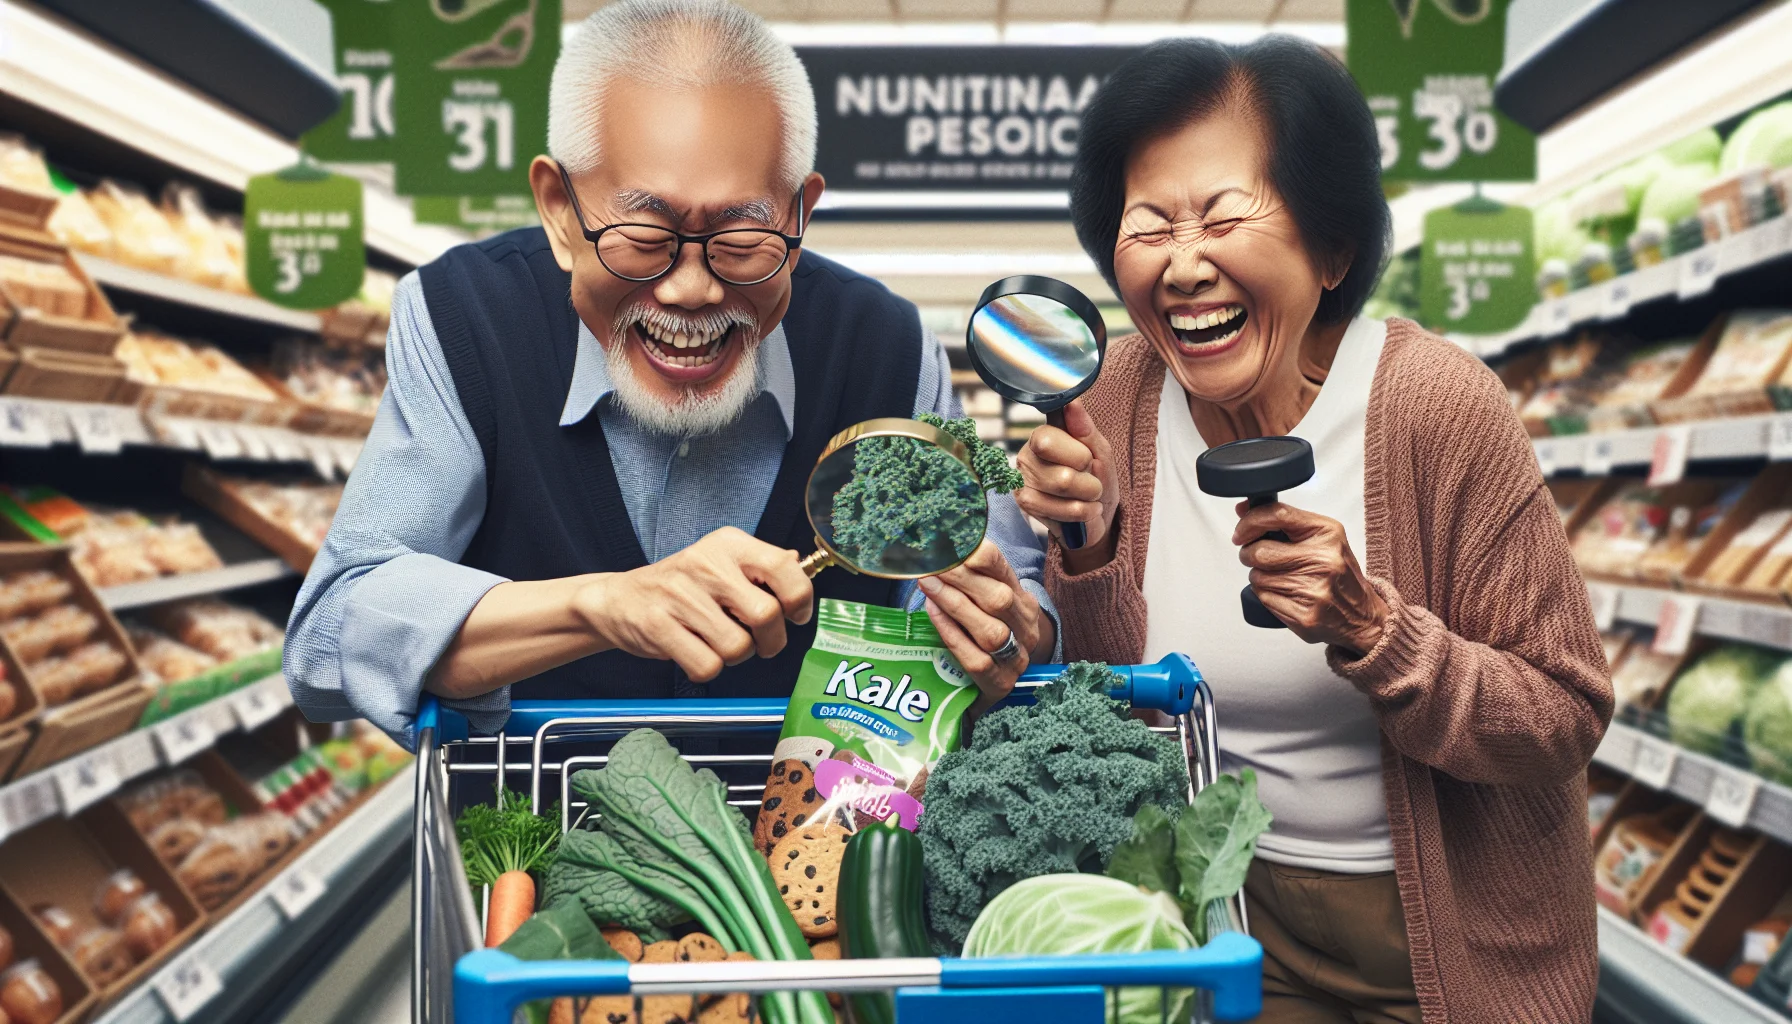 Craft an amusing, realistic scene in a grocery store. The highlight of the image is a senior citizen promotion. Imagine an elderly Asian man with a shopping cart overflowing with various green vegetables, scrutinising the nutritional information on a kale package with a magnifying glass. Next to him, an elderly Black woman laughs heartily, holding a packet of cookies in one hand and a gym dumbbell in the other. Their expressions and the surrounding environment subtly emphasises the humor and irony of seniors, diets, and healthy eating.